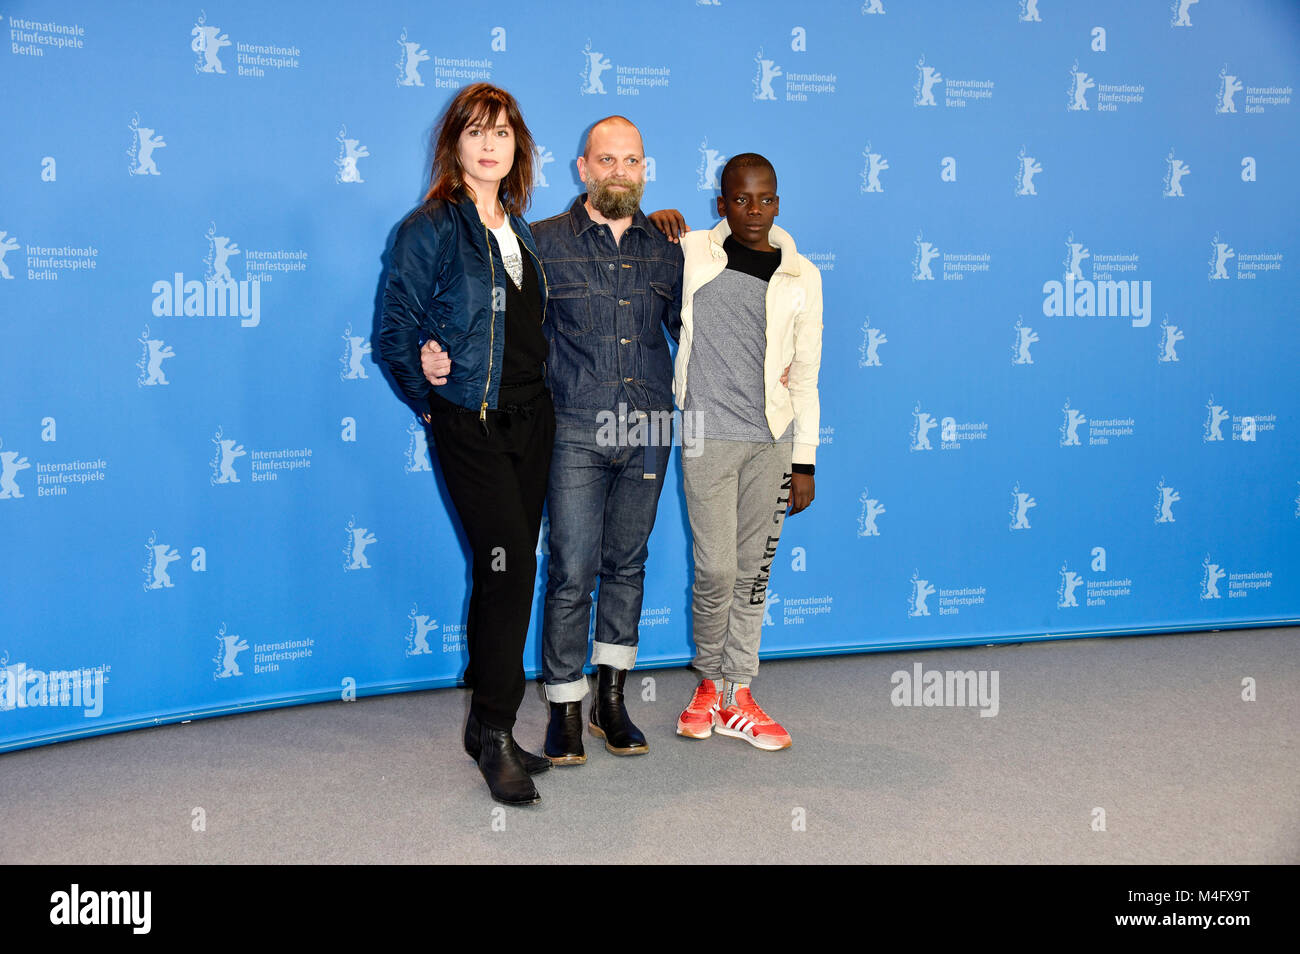 Berlin, Germany. 16th February, 2018. Susanne Wolff, Wolfgang Fischer and Gedion Oduor Wekesa during the 'Styx' photocall at the 68th Berlin International Film Festival / Berlinale 2018 on February 16, 2018 in Berlin, Germany. Credit: Geisler-Fotopress/Alamy Live News Stock Photo